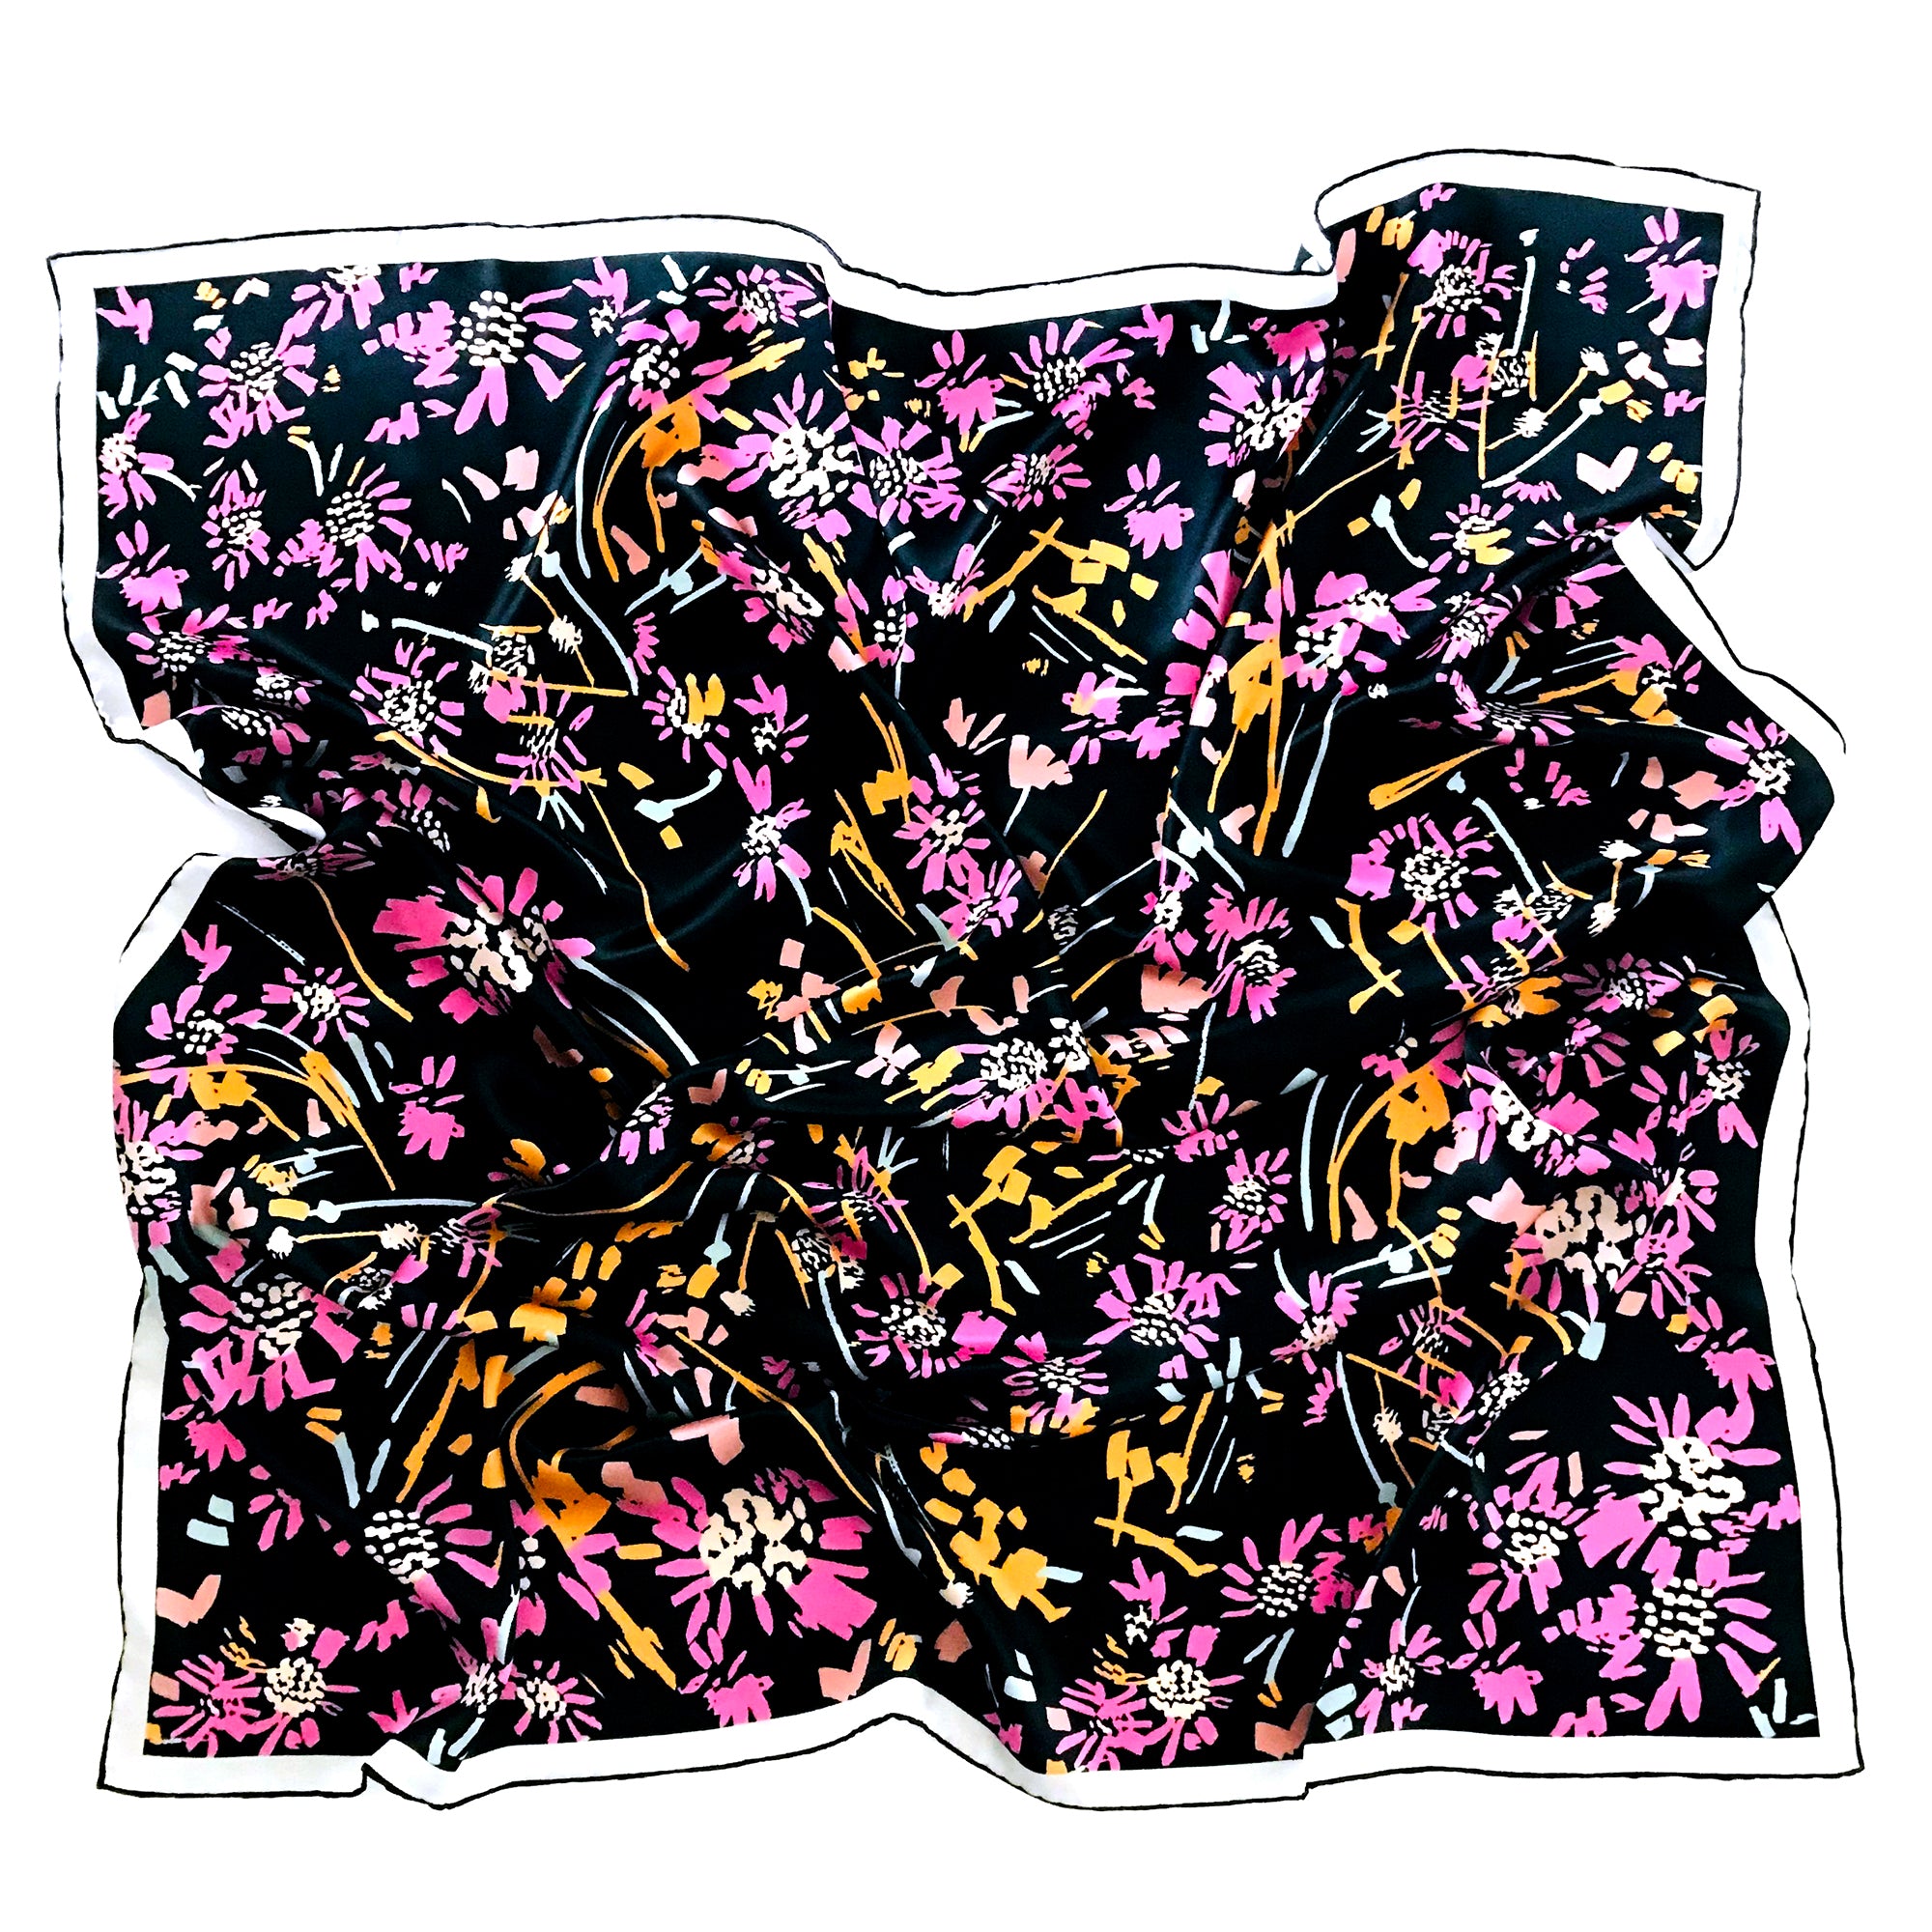 An explosion of pink daisies and orange gestural brush strokes ignite on the opulent black base in this energetic Crimson Rose scarf design. 